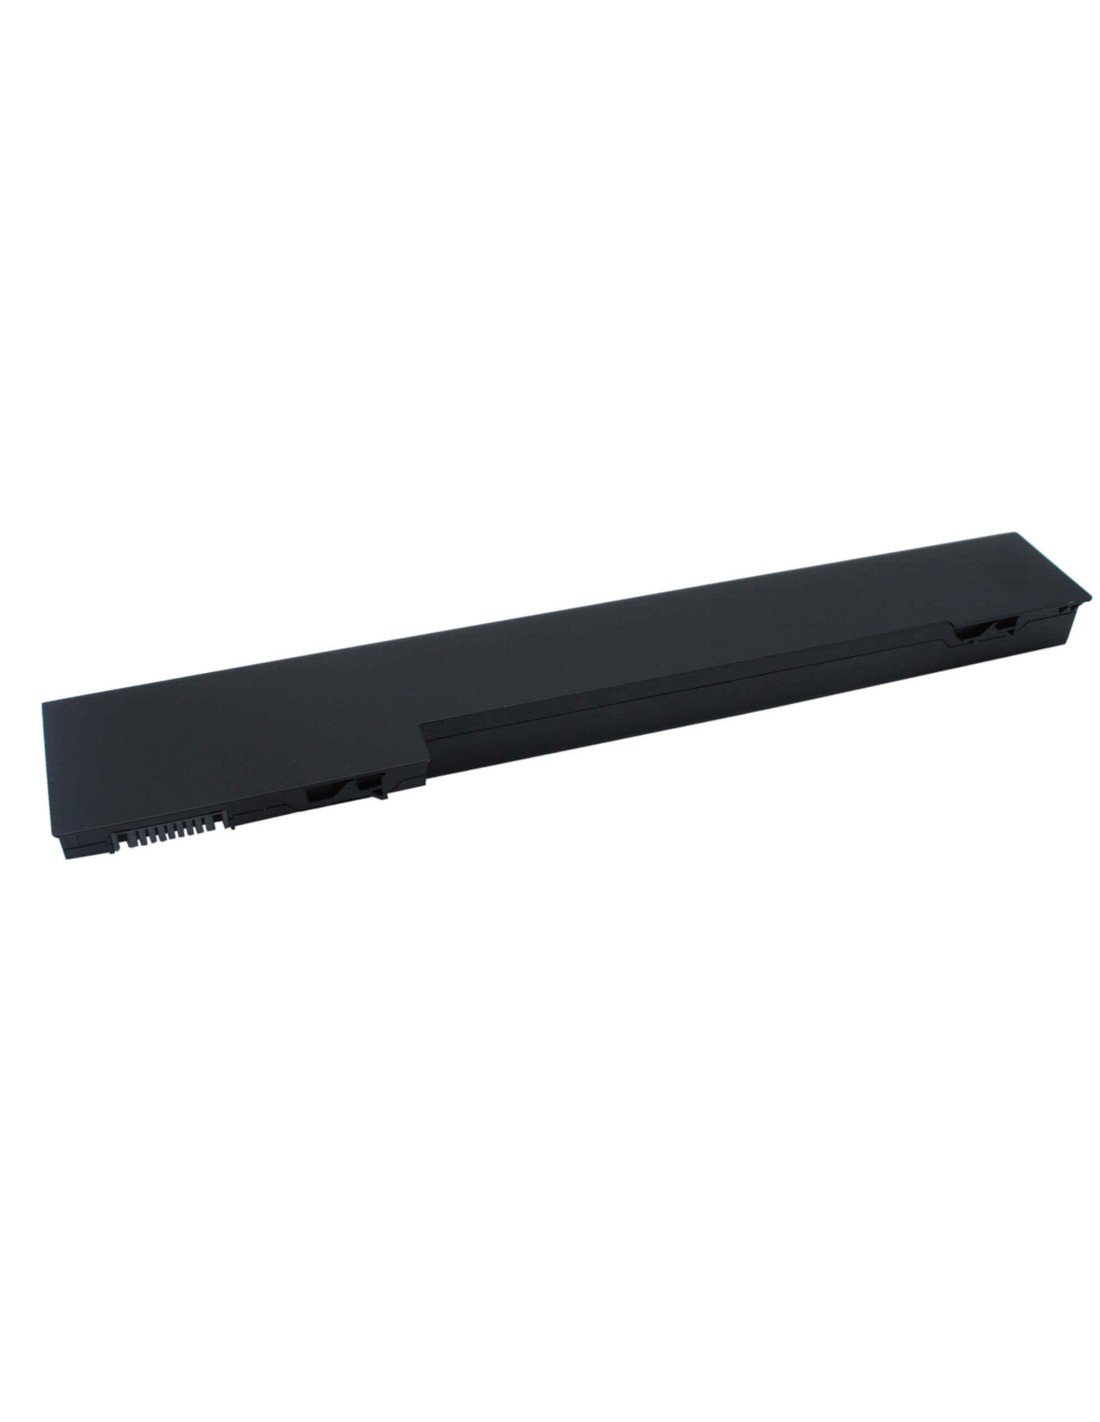 Black Battery for HP ZBook 15, ZBook 17, ZBook 729BJC321015 14.4V, 4400mAh - 63.36Wh